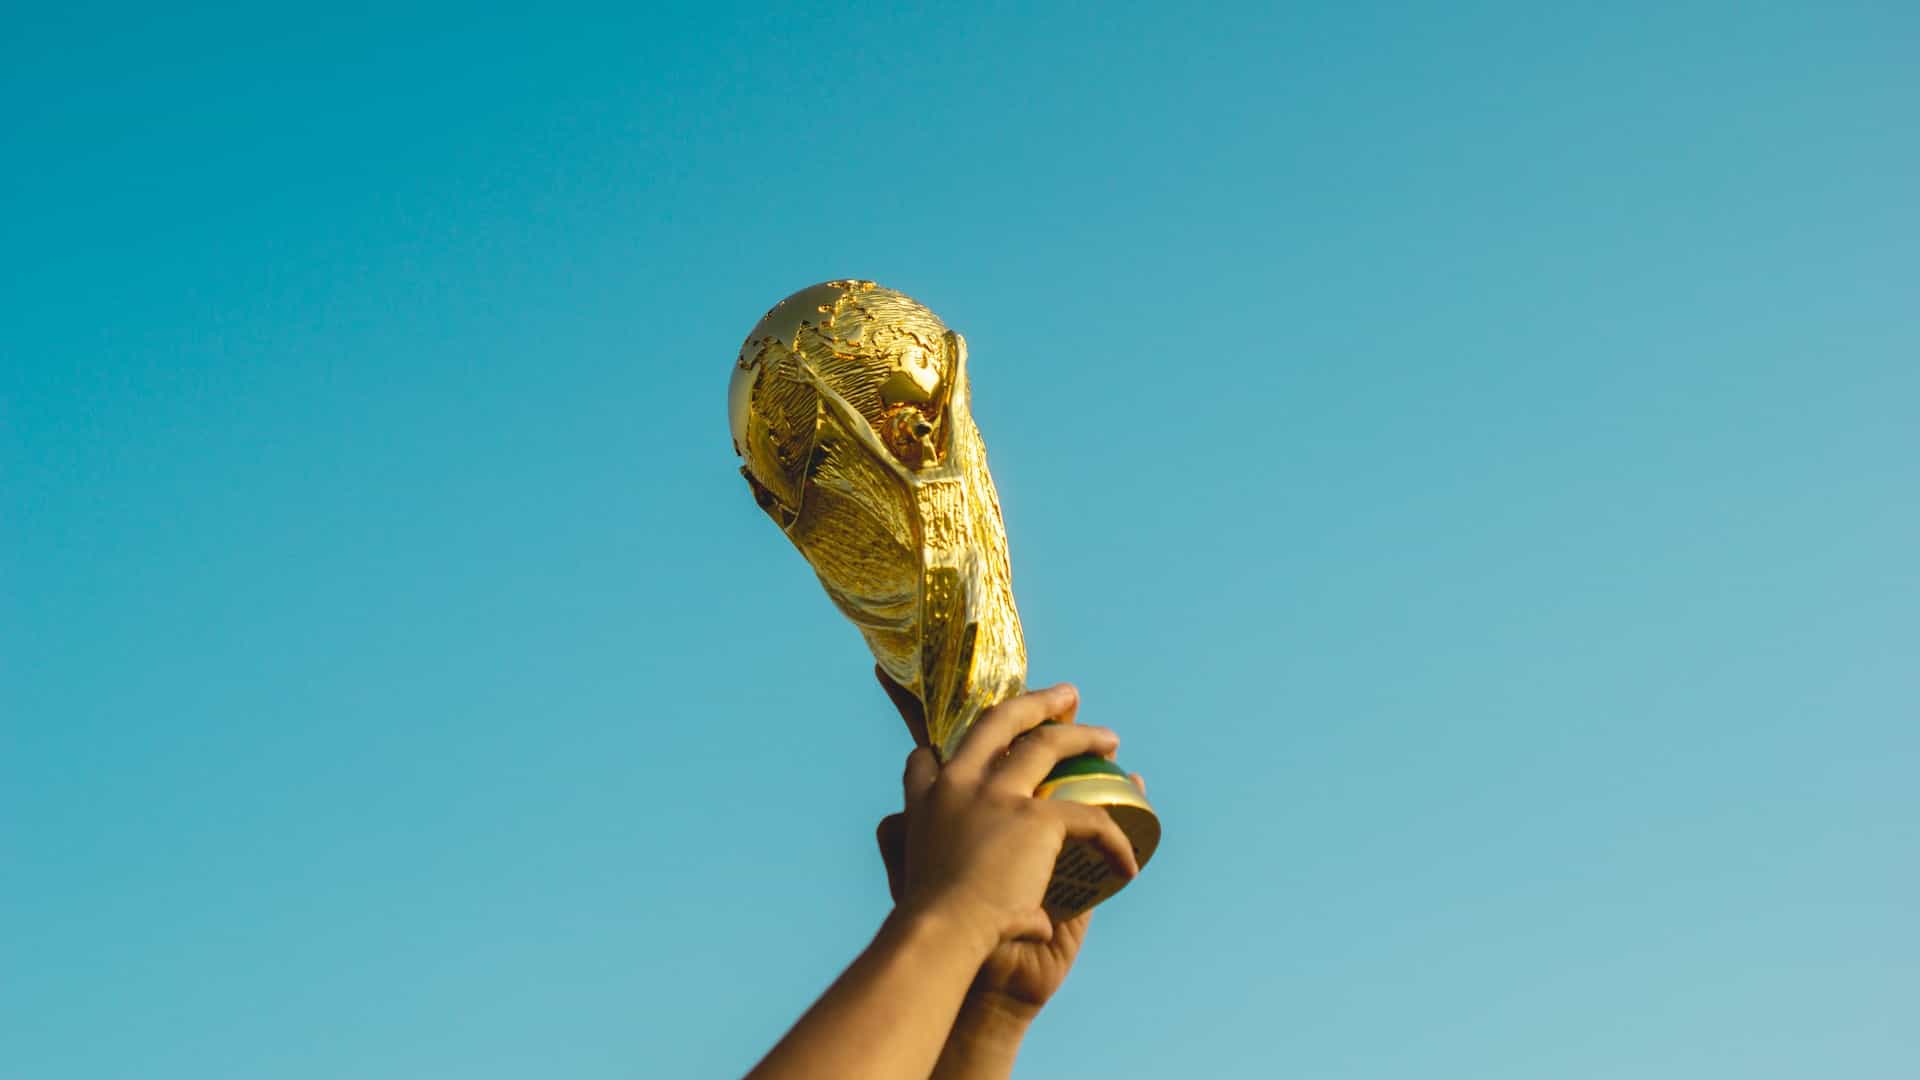 Hands hold the World Cup trophy up against a bright blue sky.